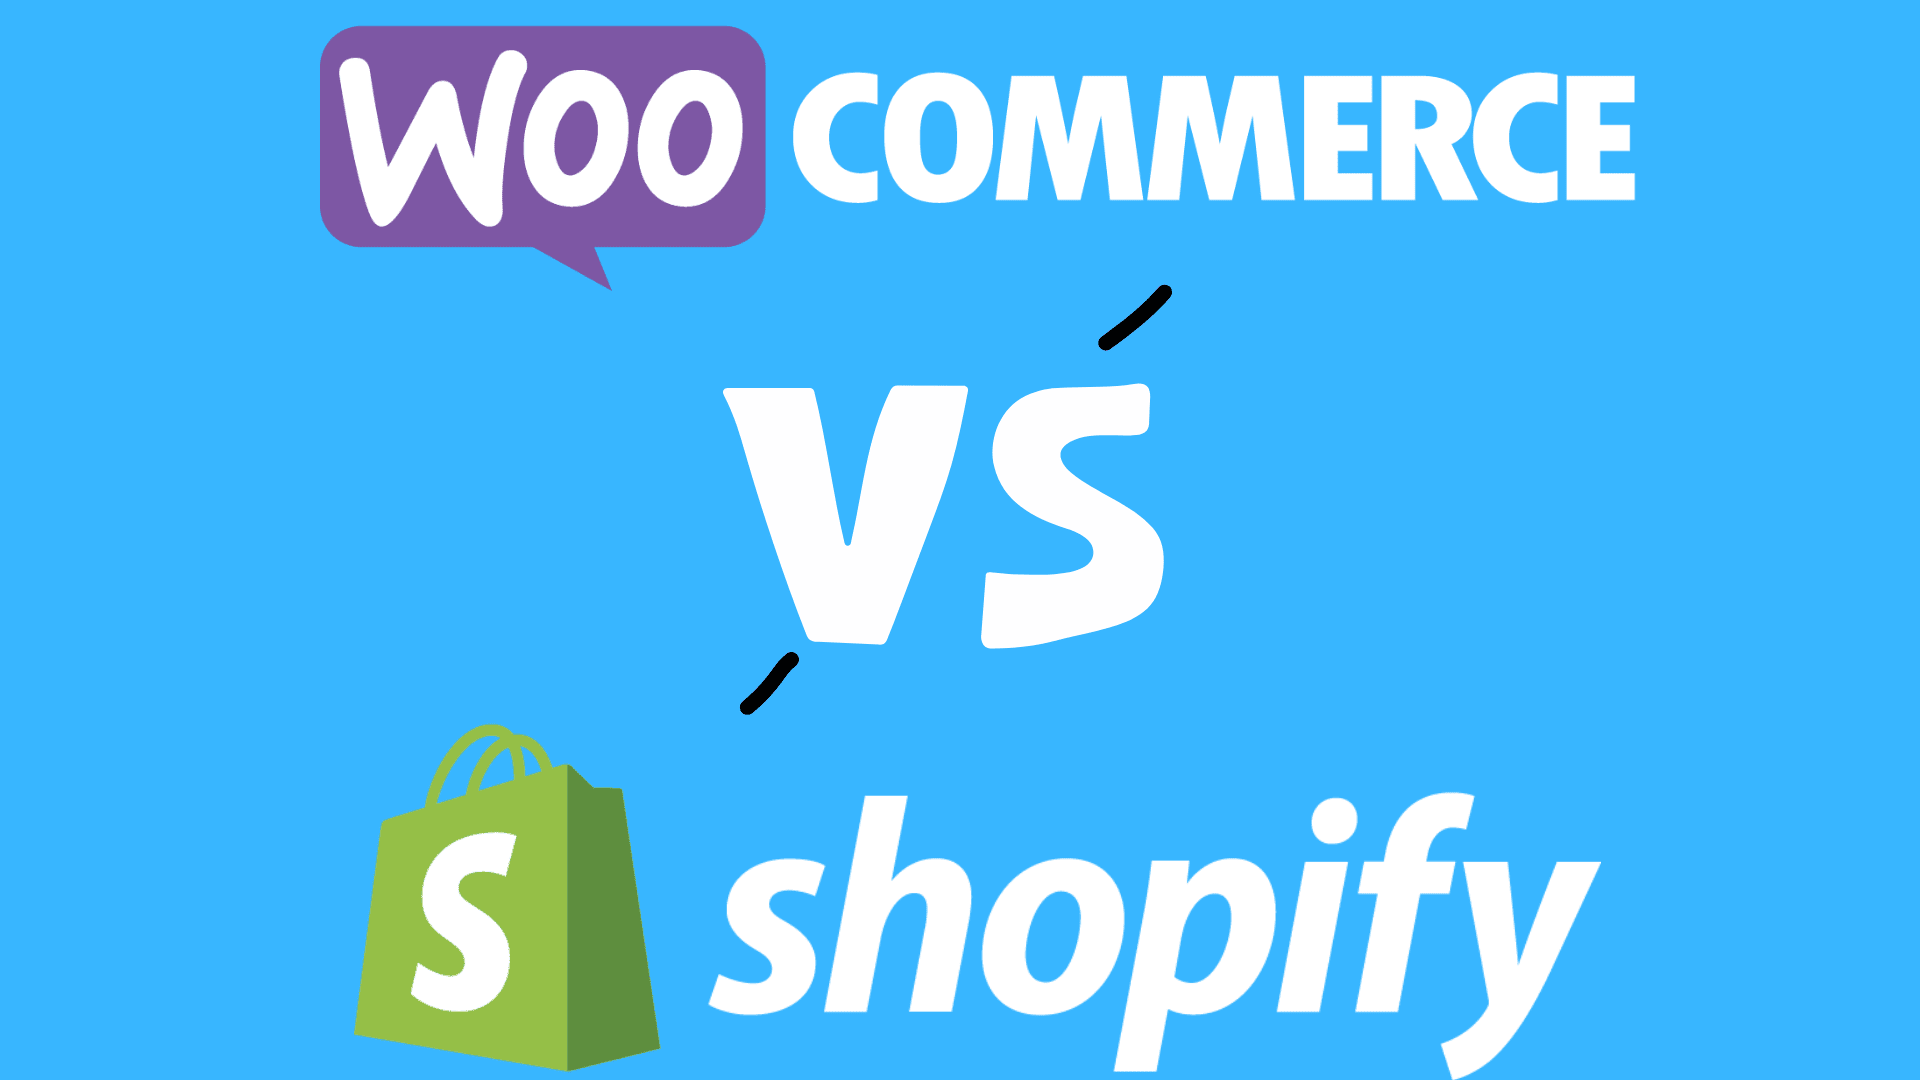 Is WooCommerce as good as Shopify?